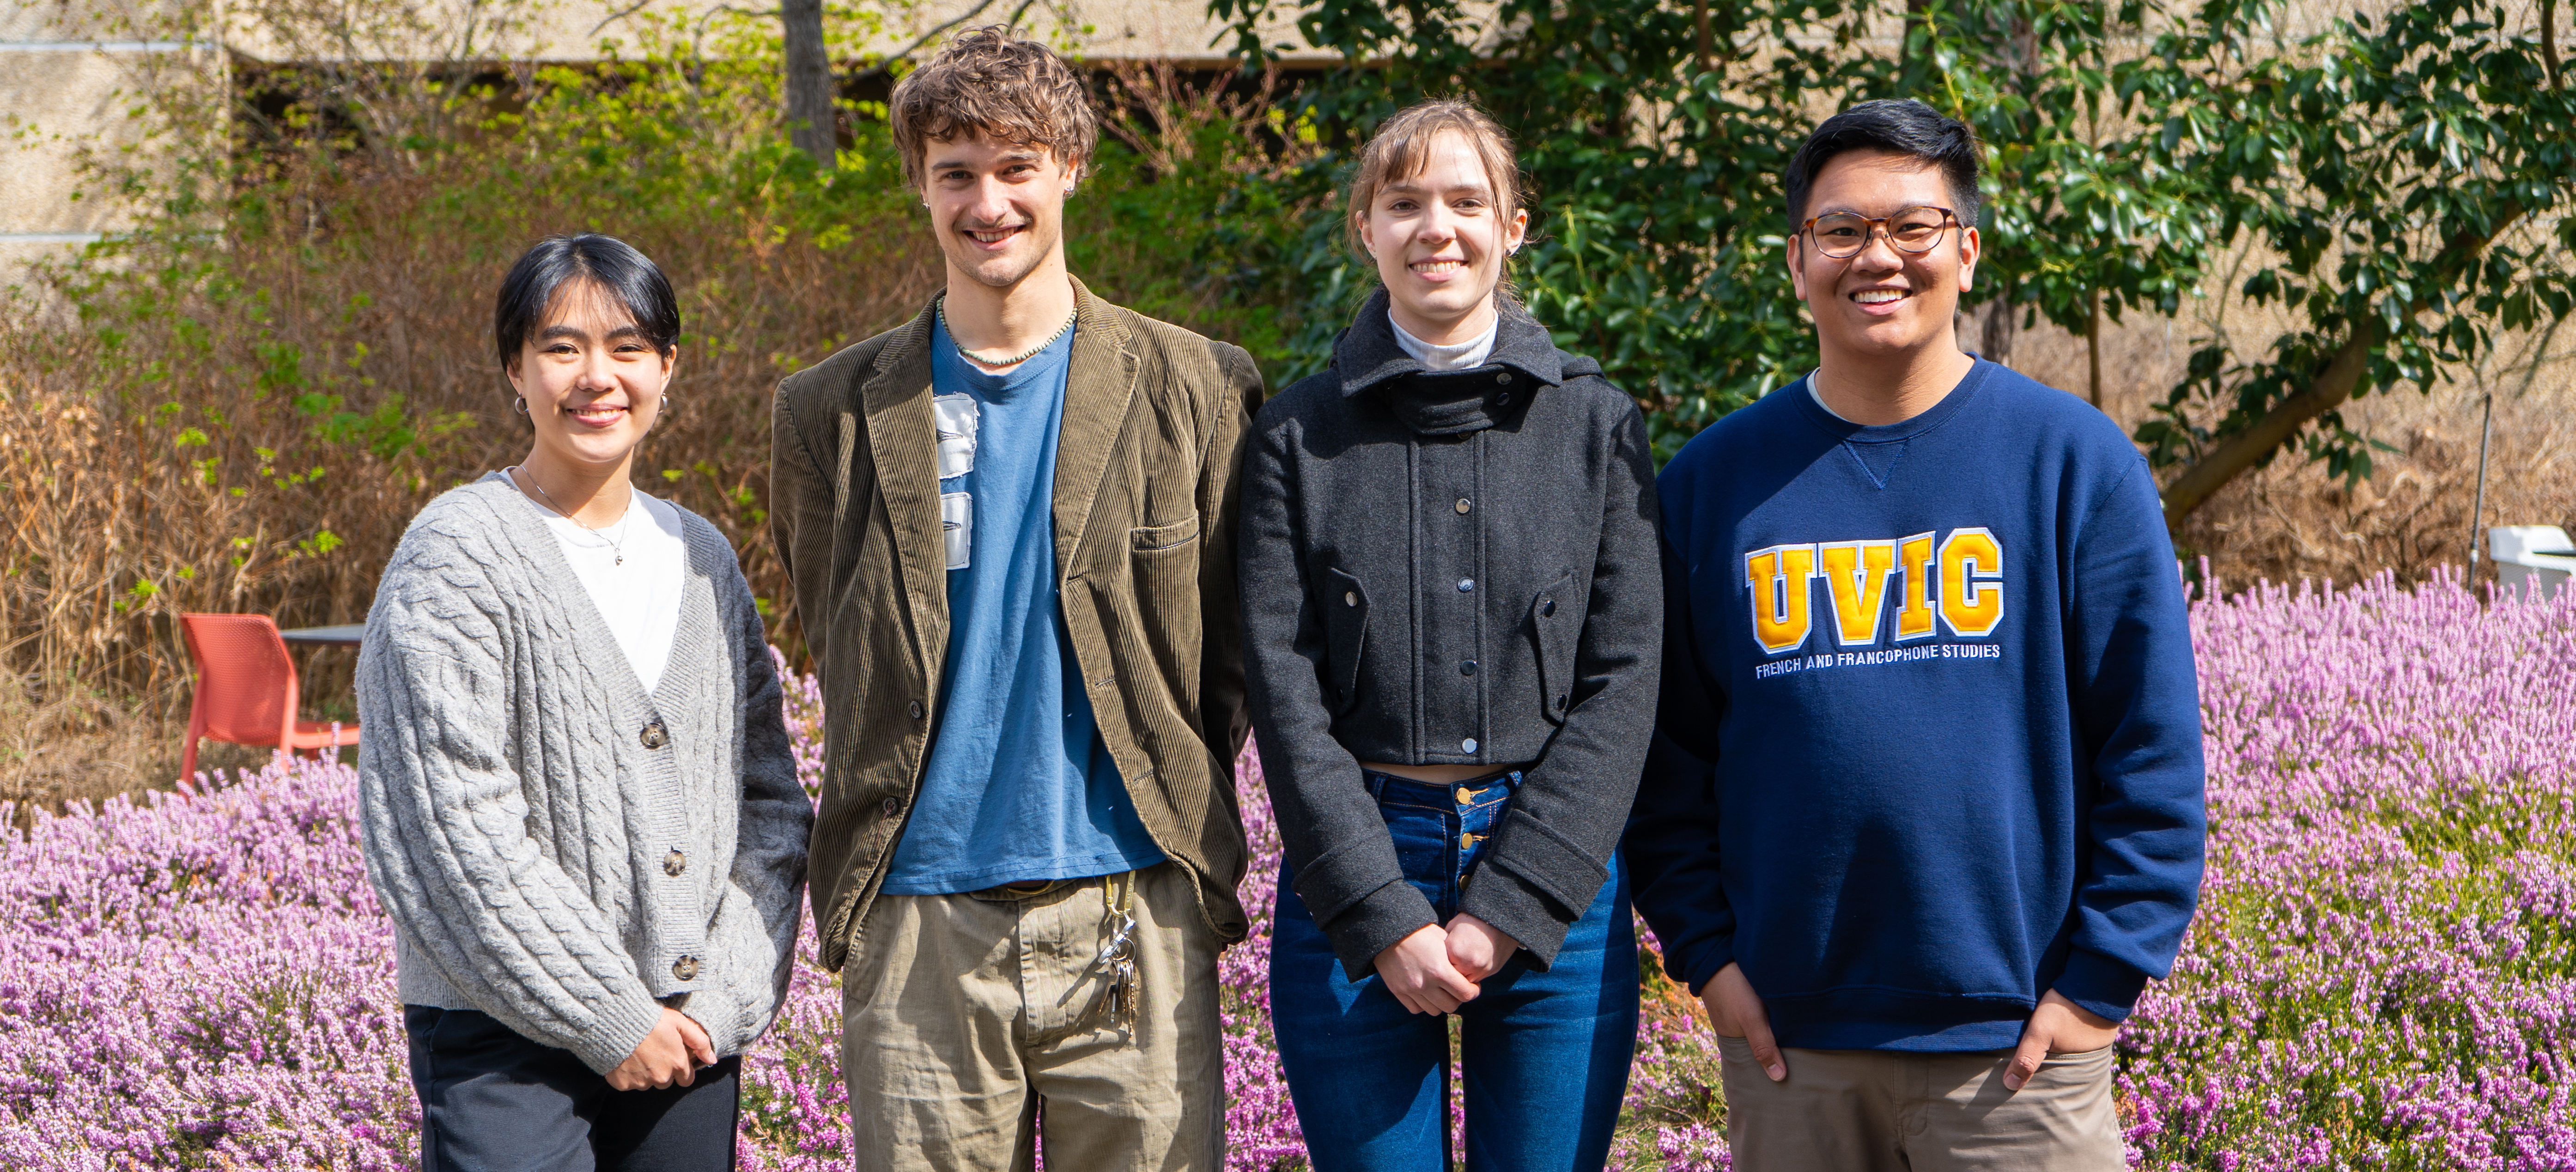 Four students are smiling on a sunny day in the Clearihue Courtyard, posing in front of blooming purple flowers on shrubs.